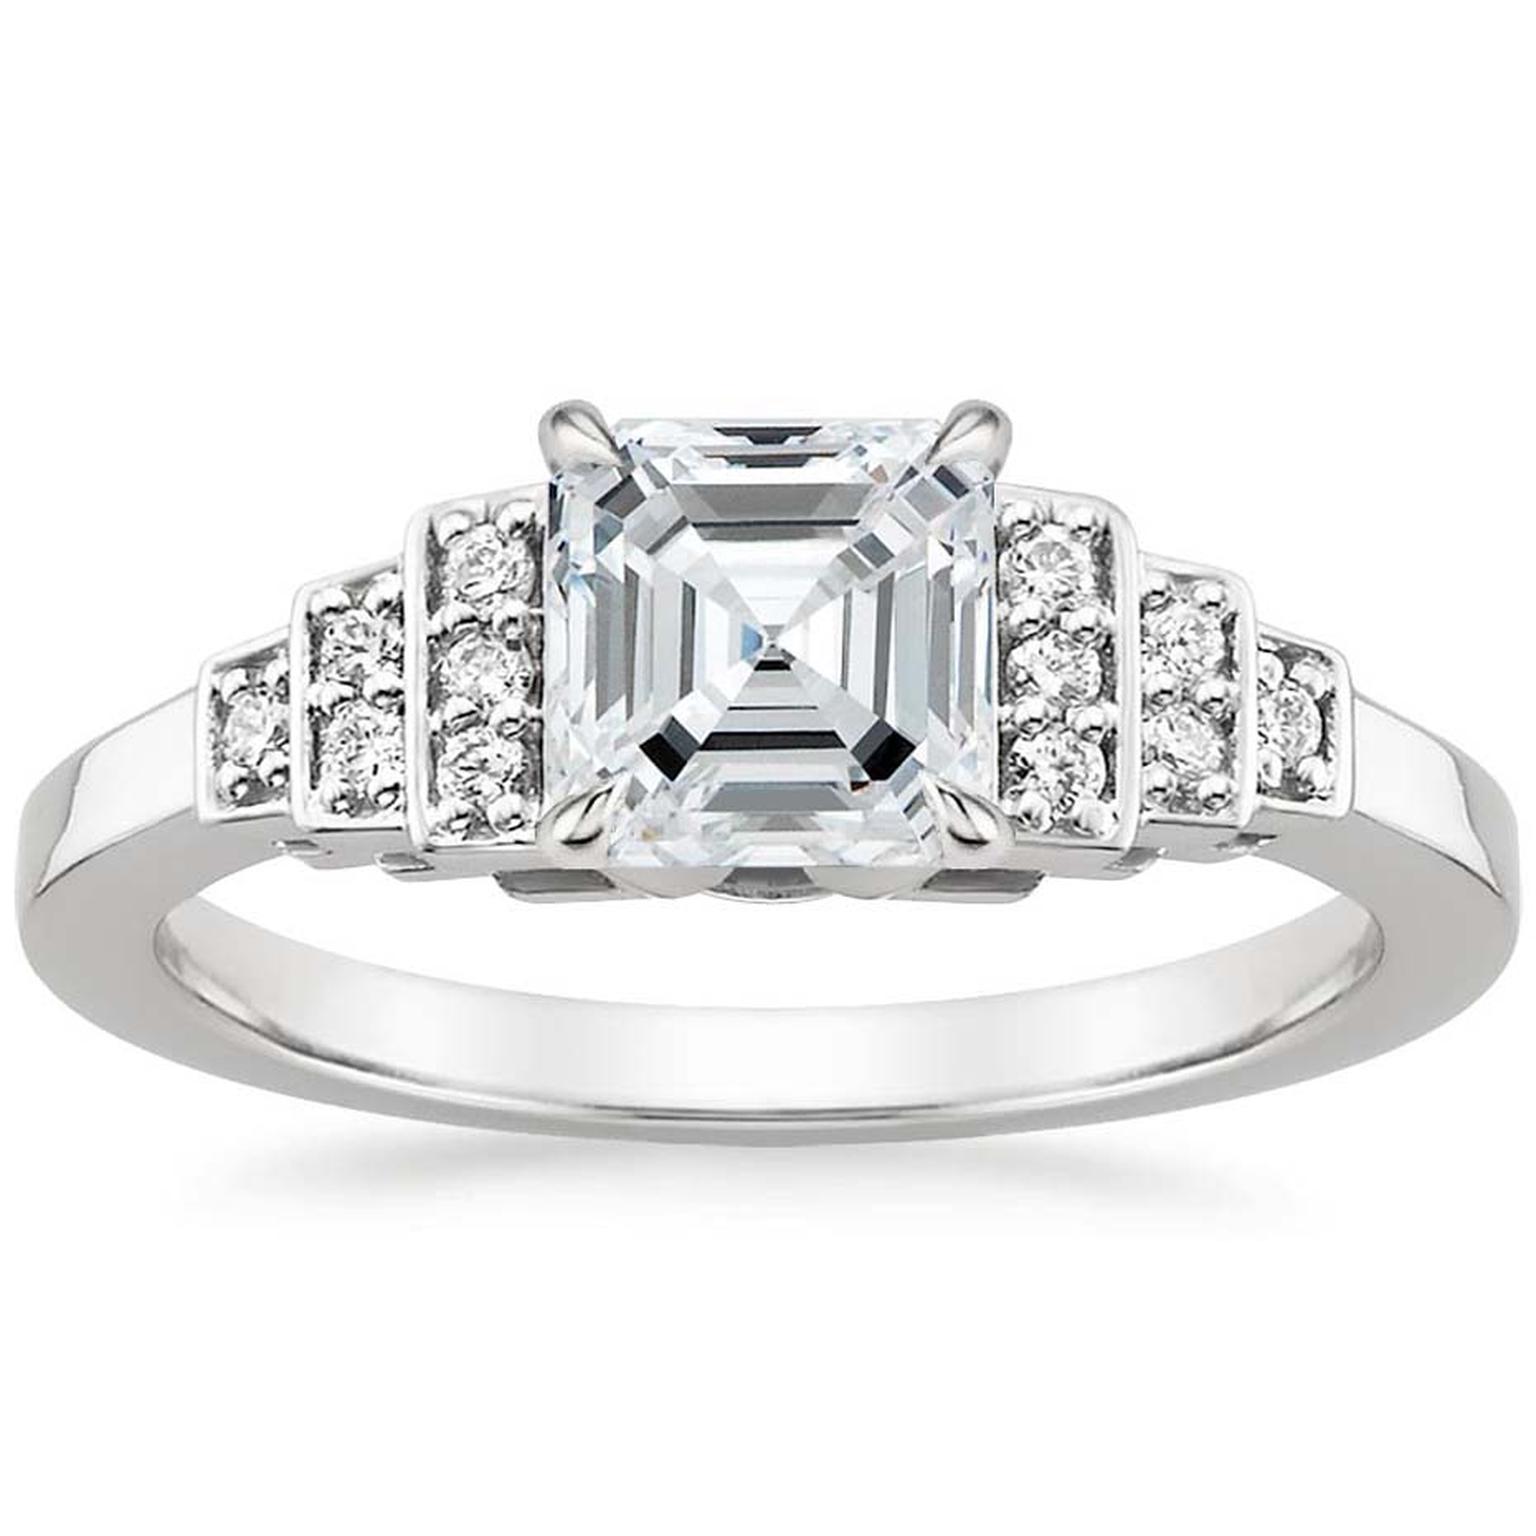 Brilliant Earth Aster diamond engagement ring in white gold featuring an Asscher-cut diamond with diamond accents.